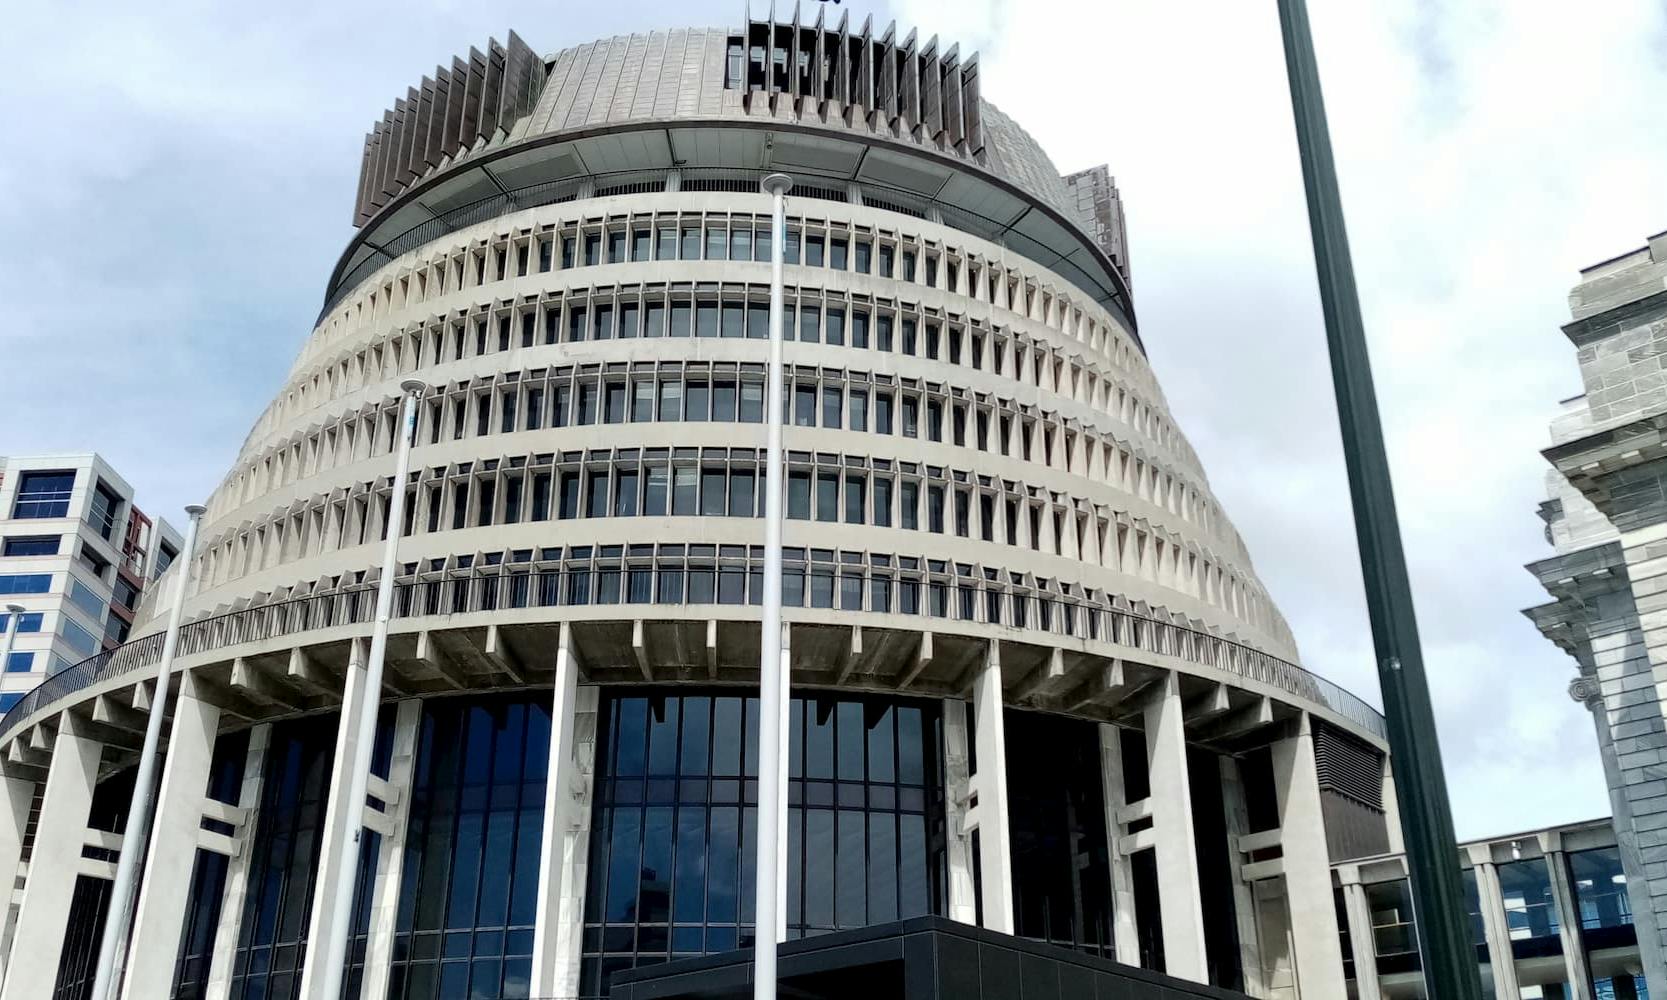 Exterior of the Beehive, New Zealand's Parliament building in Wellington